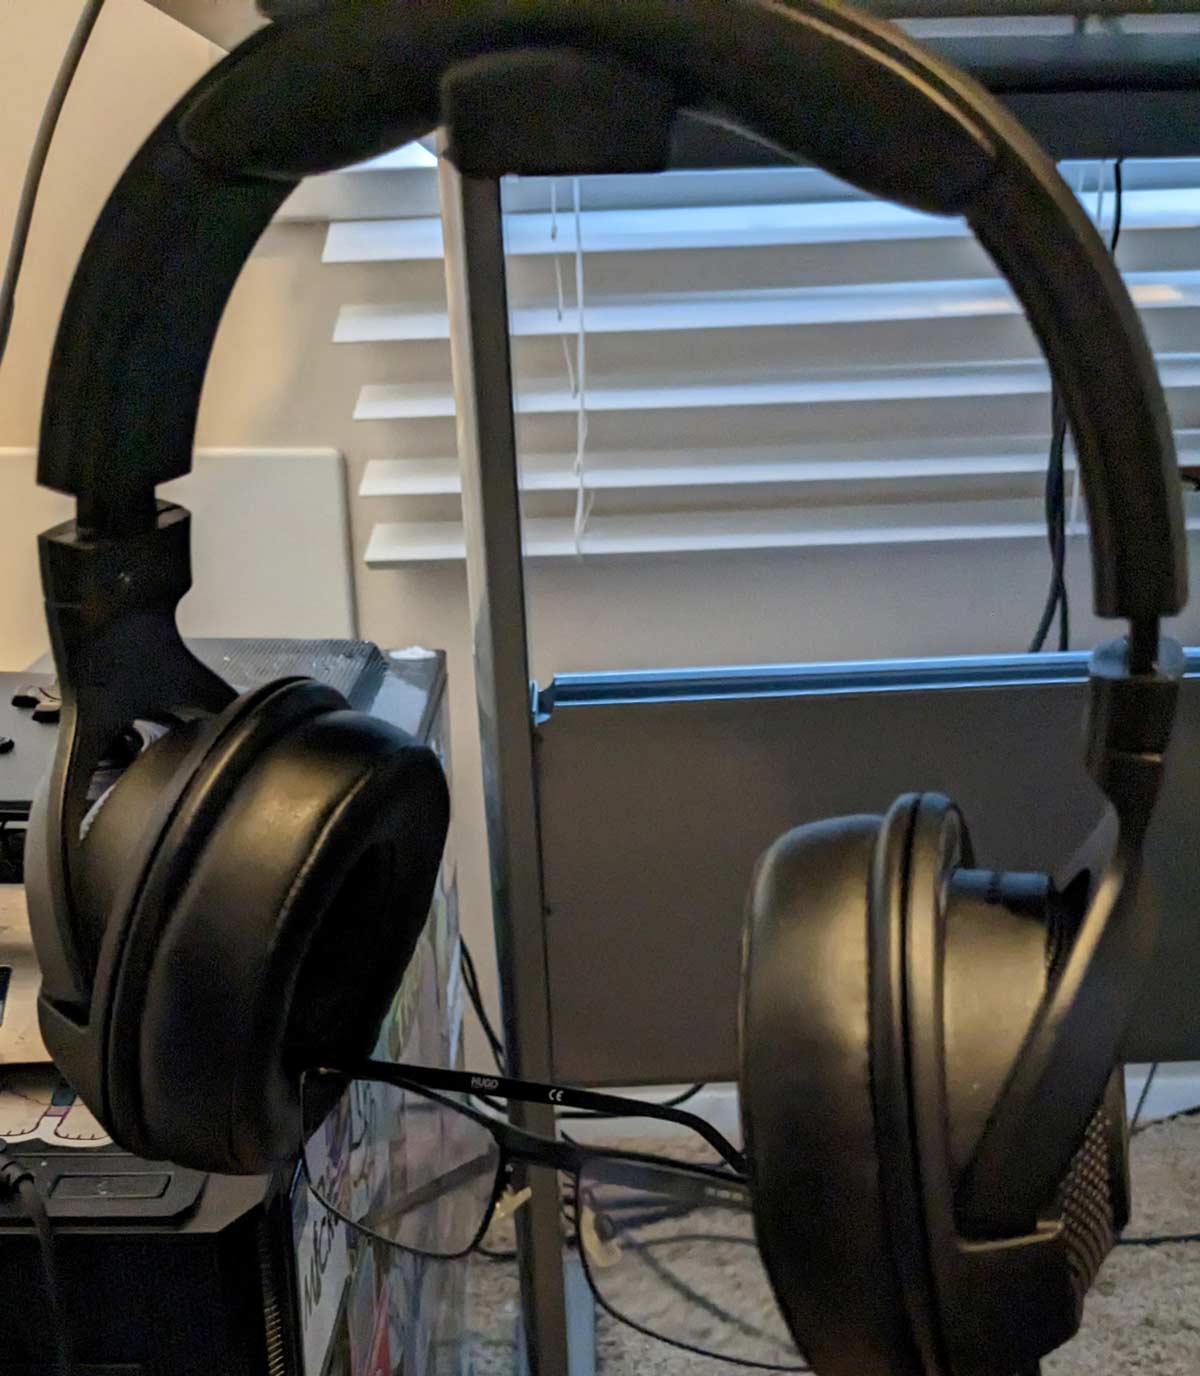 Couldn't find my glasses for 4 hours... They came off with my headset and just stayed there